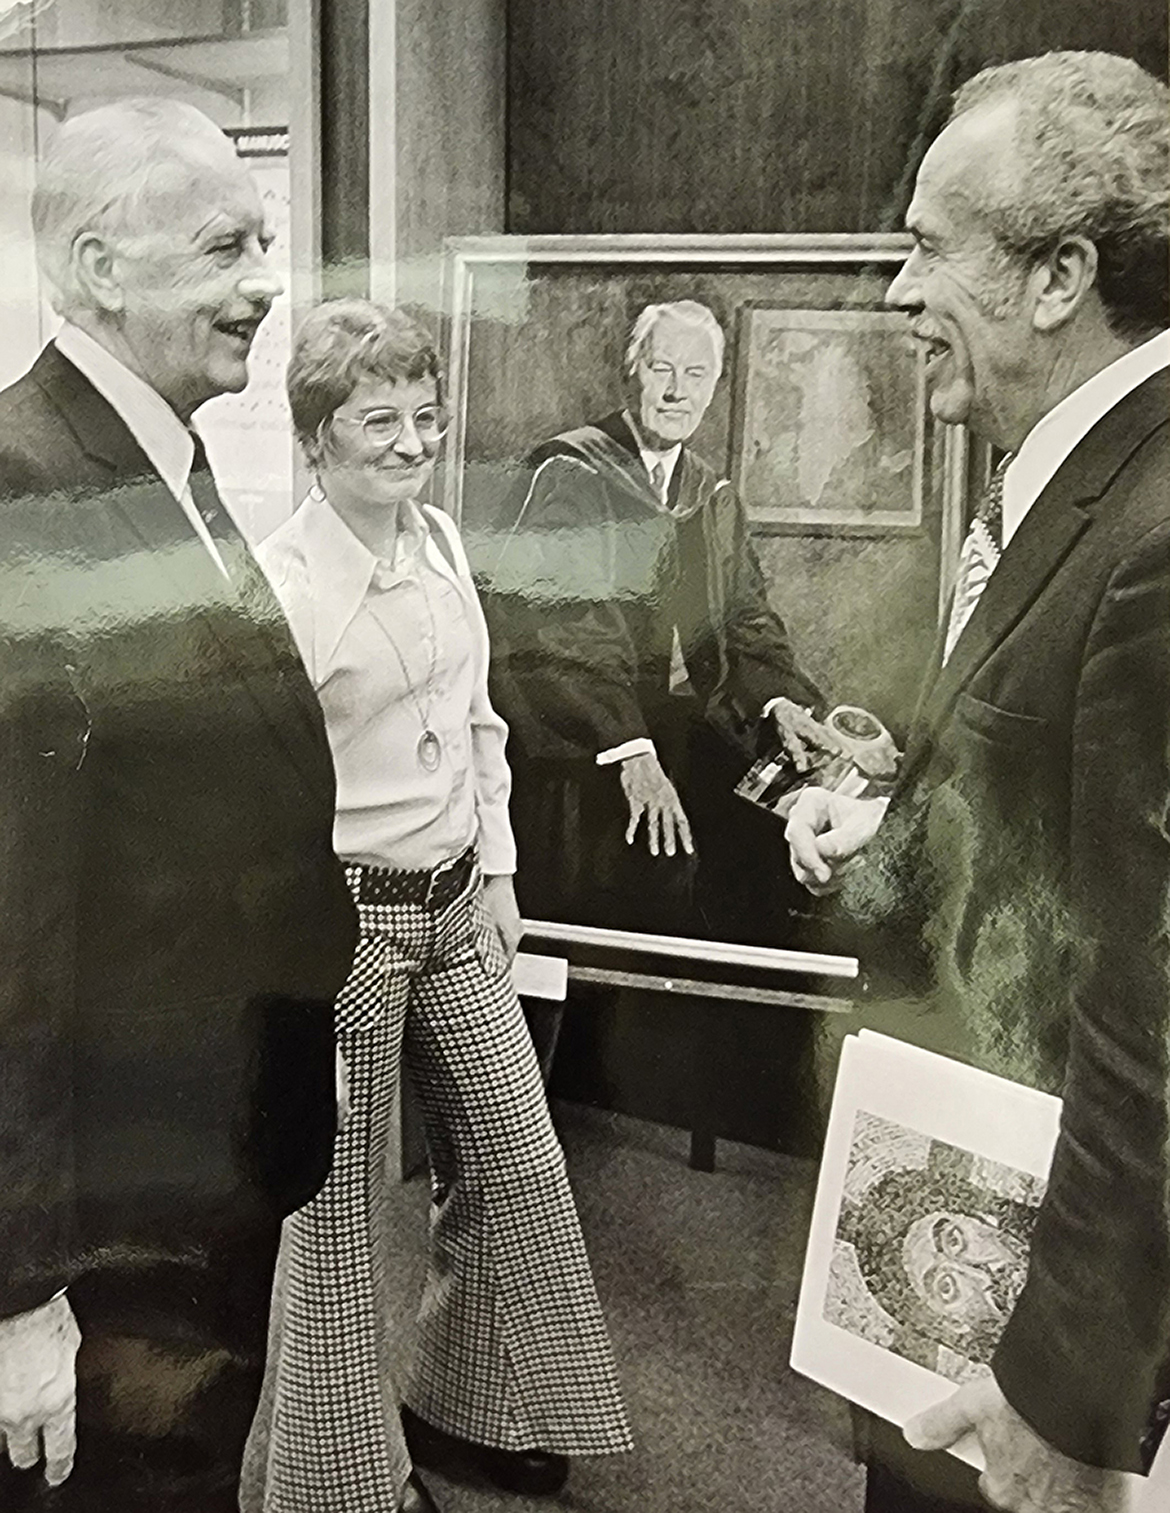 Present Carlson honored with a portrait, 1972